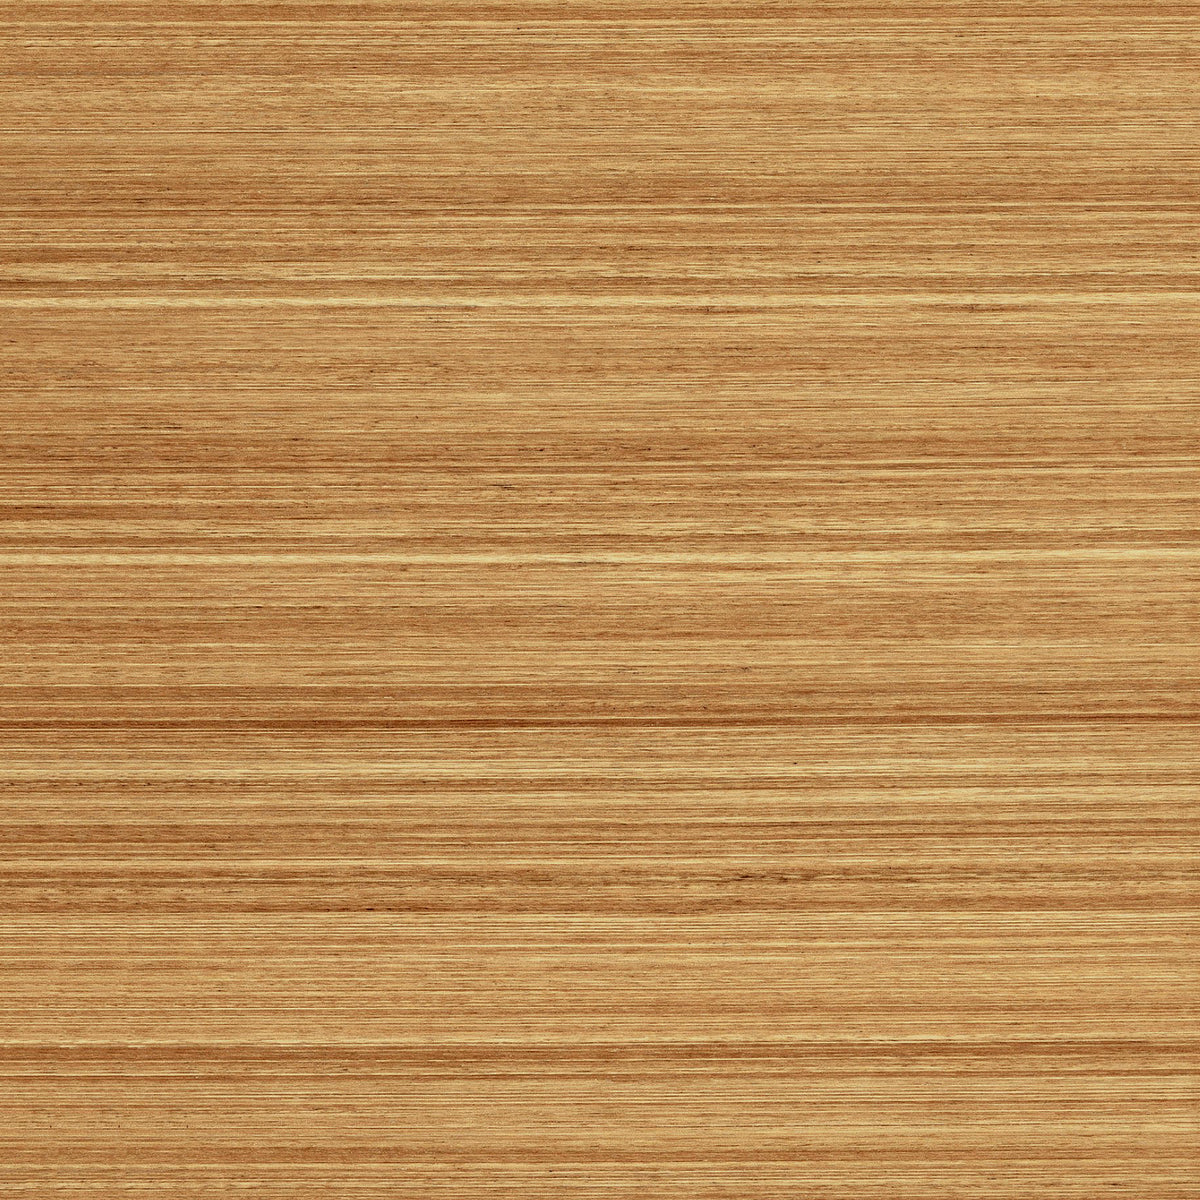 Tasmanian Oak is a sustainable native Australian hardwood. It is recognised for its excellent staining qualities, which allow ready matching with other timbers, finishes or furnishings. Colour: varying from light straw to reddish brown with intermediate shades of cream to pink. Order your free sample today!